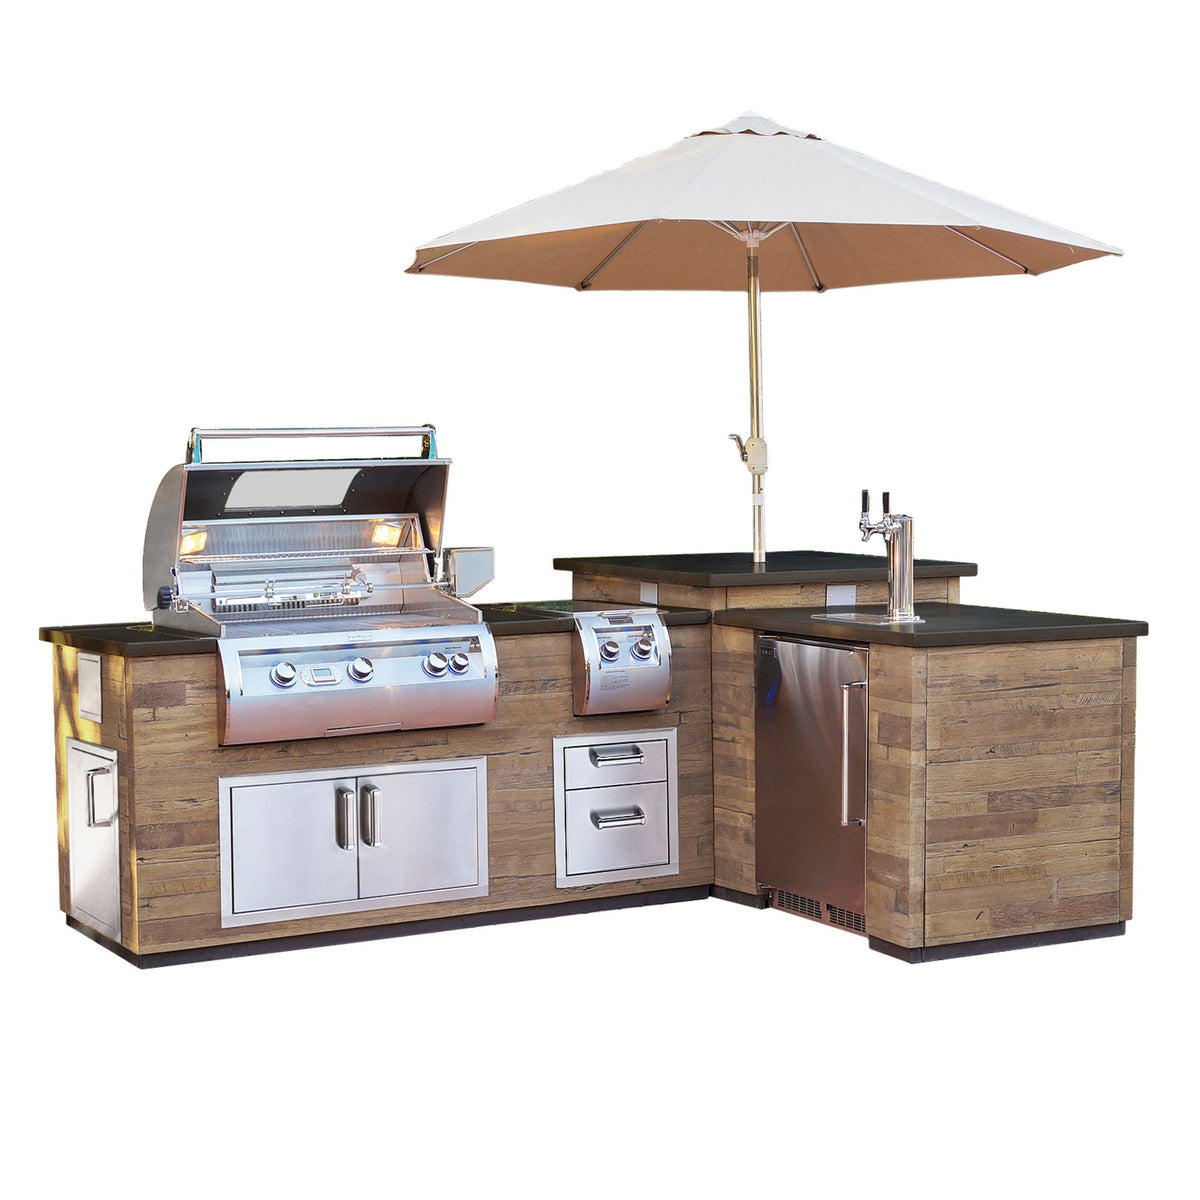 OutdoorKitchenPro Fire Magic L Shape “Reclaimed Wood” Islands with French Barrel Oak or Silver Pine Base and Black Lava Polished Top